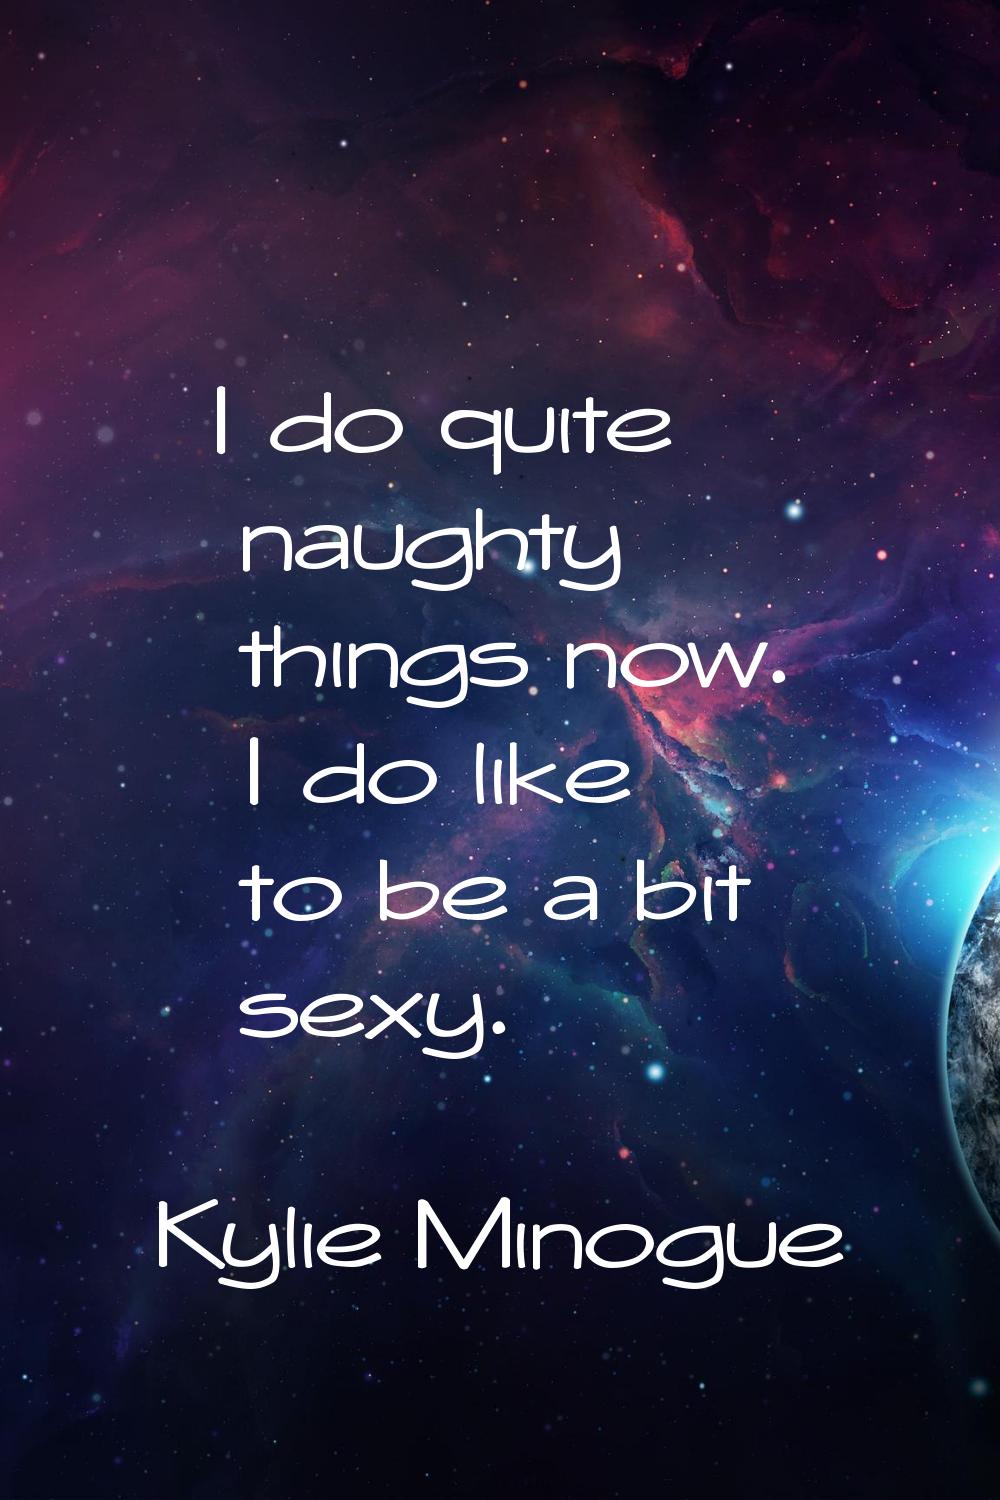 I do quite naughty things now. I do like to be a bit sexy.